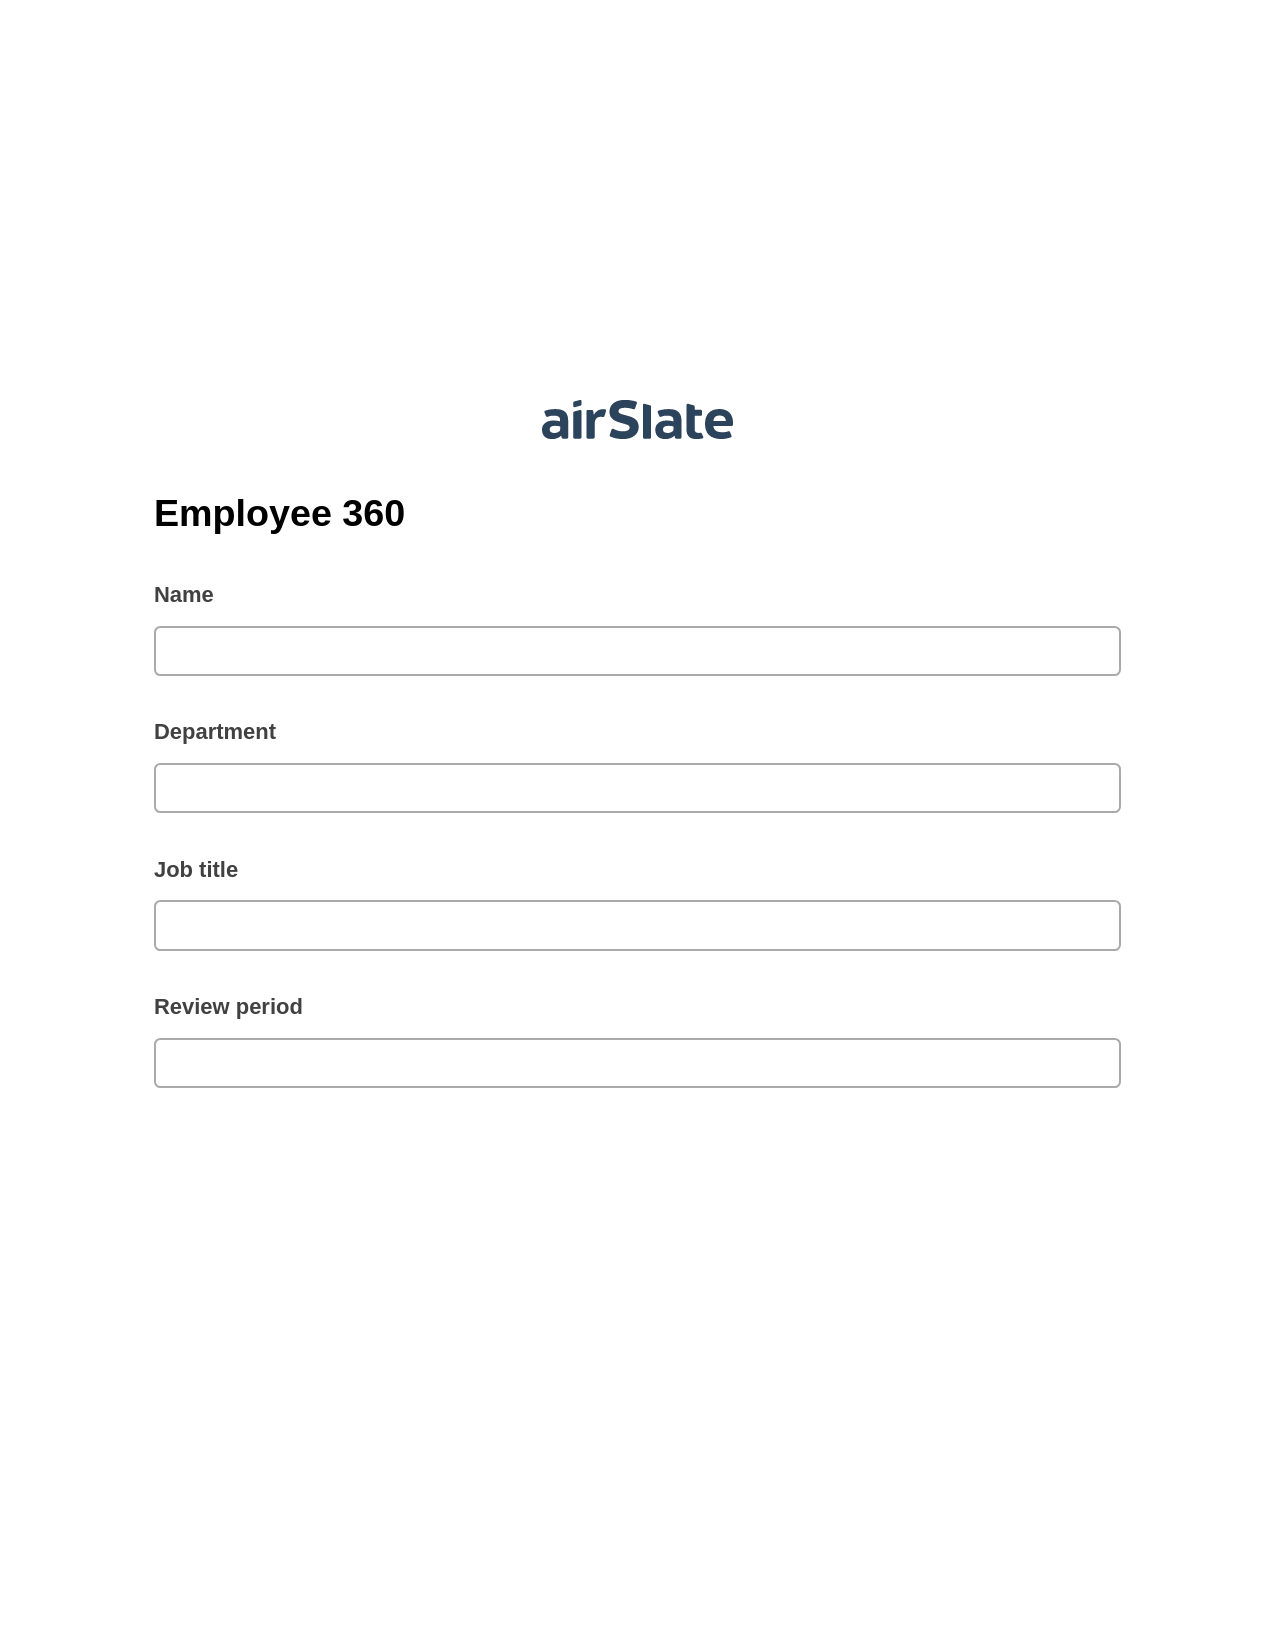 Multirole Employee 360 Pre-fill from CSV File Bot, Remove Slate Bot, Archive to Google Drive Bot